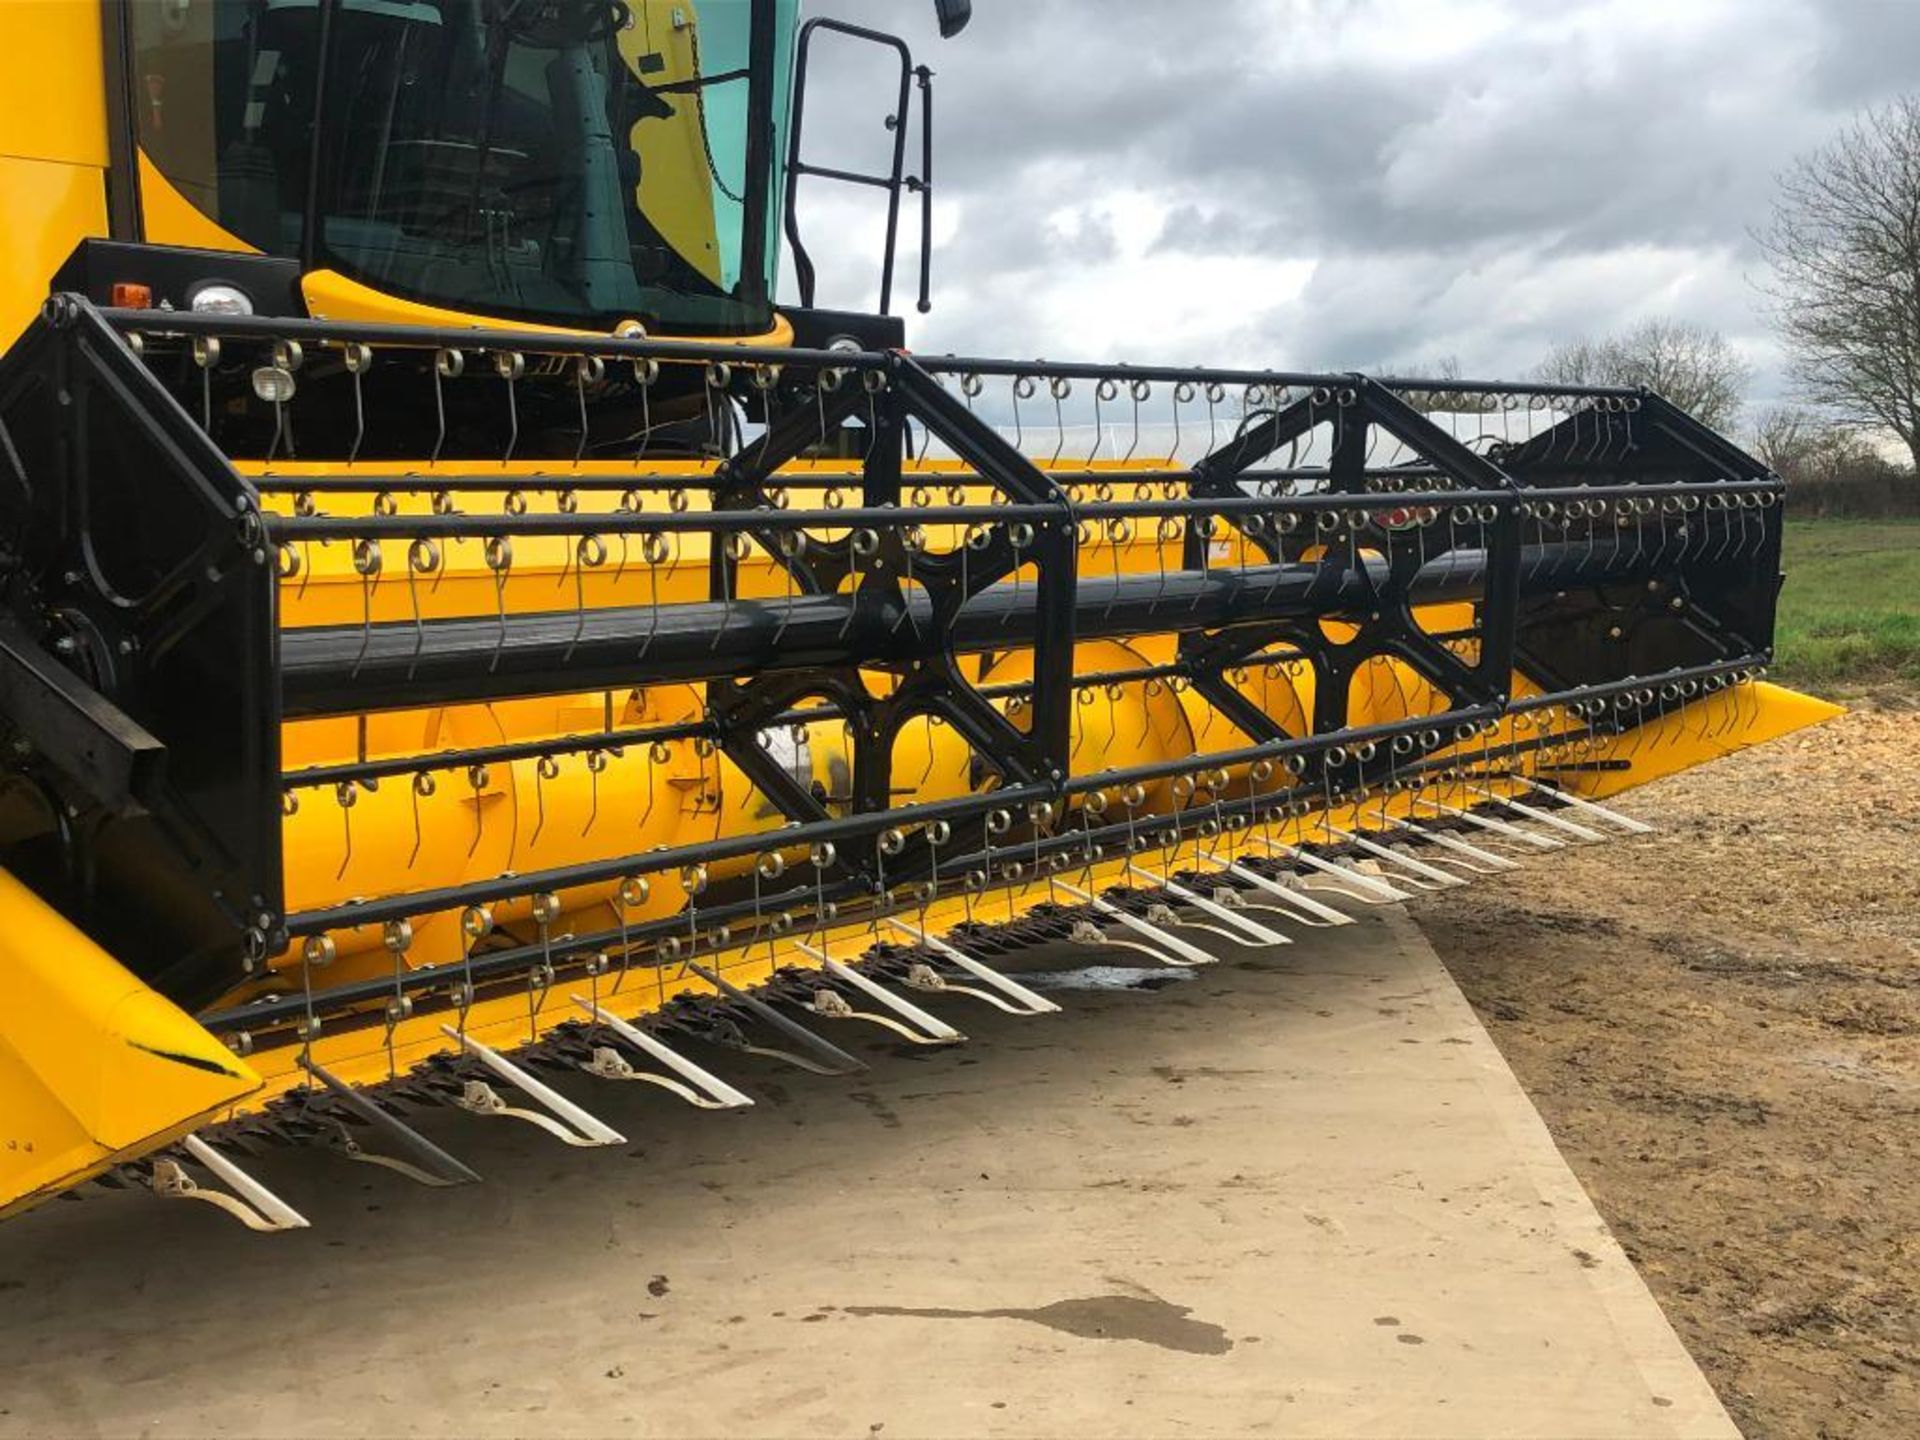 2018 New Holland TC5.90 combine harvester with straw chopper and Ceres 8000i grain monitoring system - Image 15 of 35